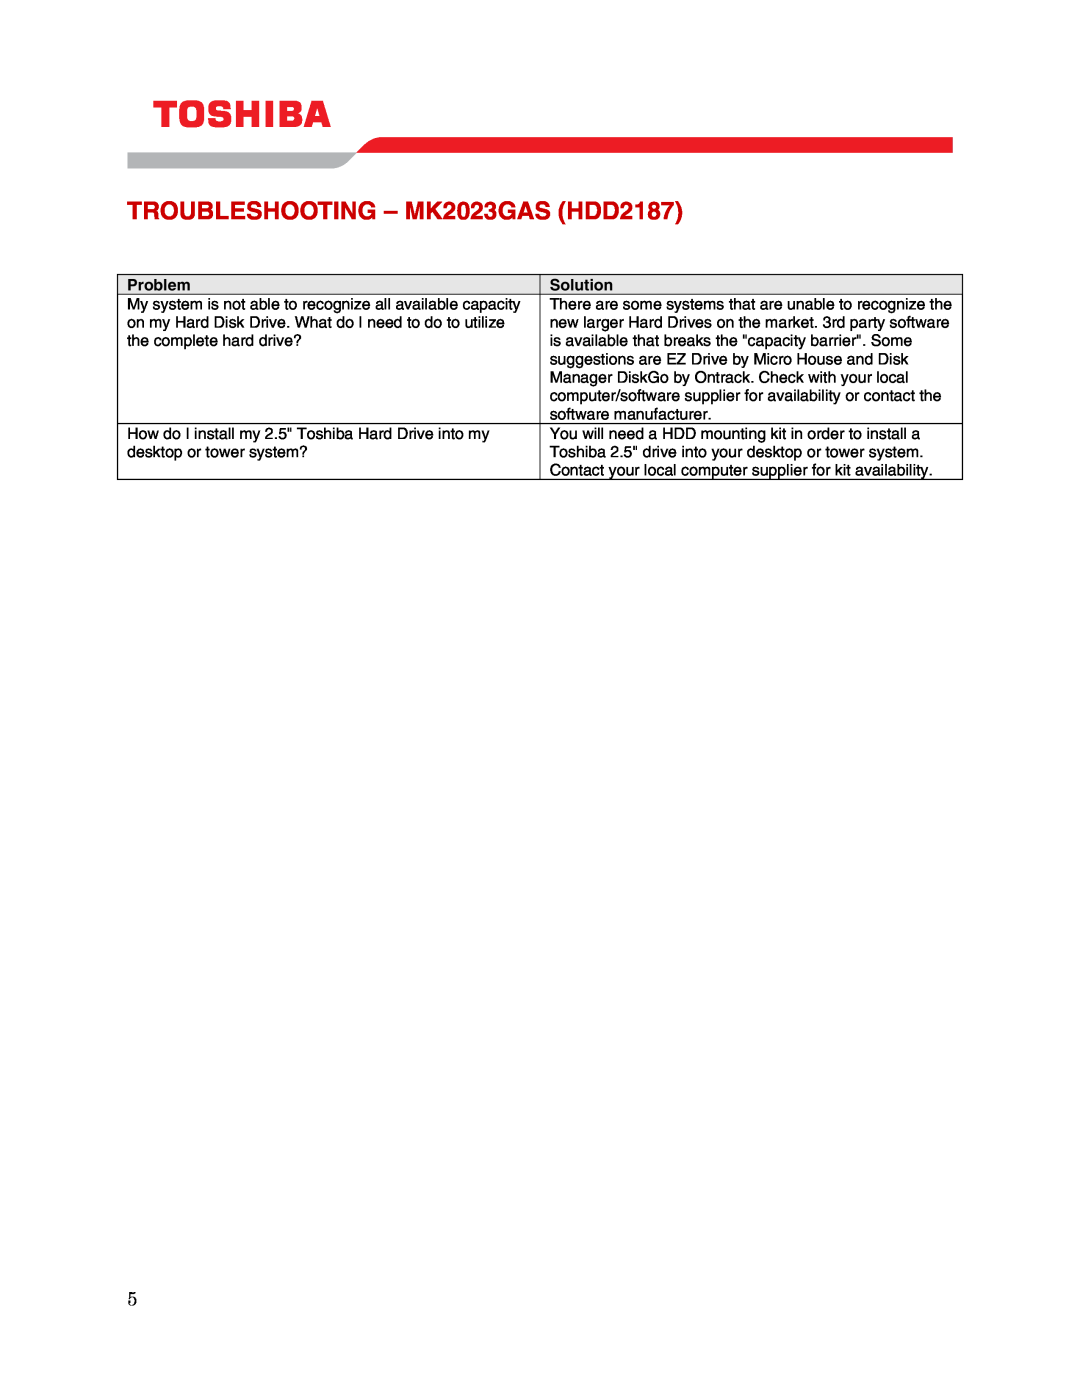 Toshiba user manual TROUBLESHOOTING - MK2023GAS HDD2187, Problem, Solution 